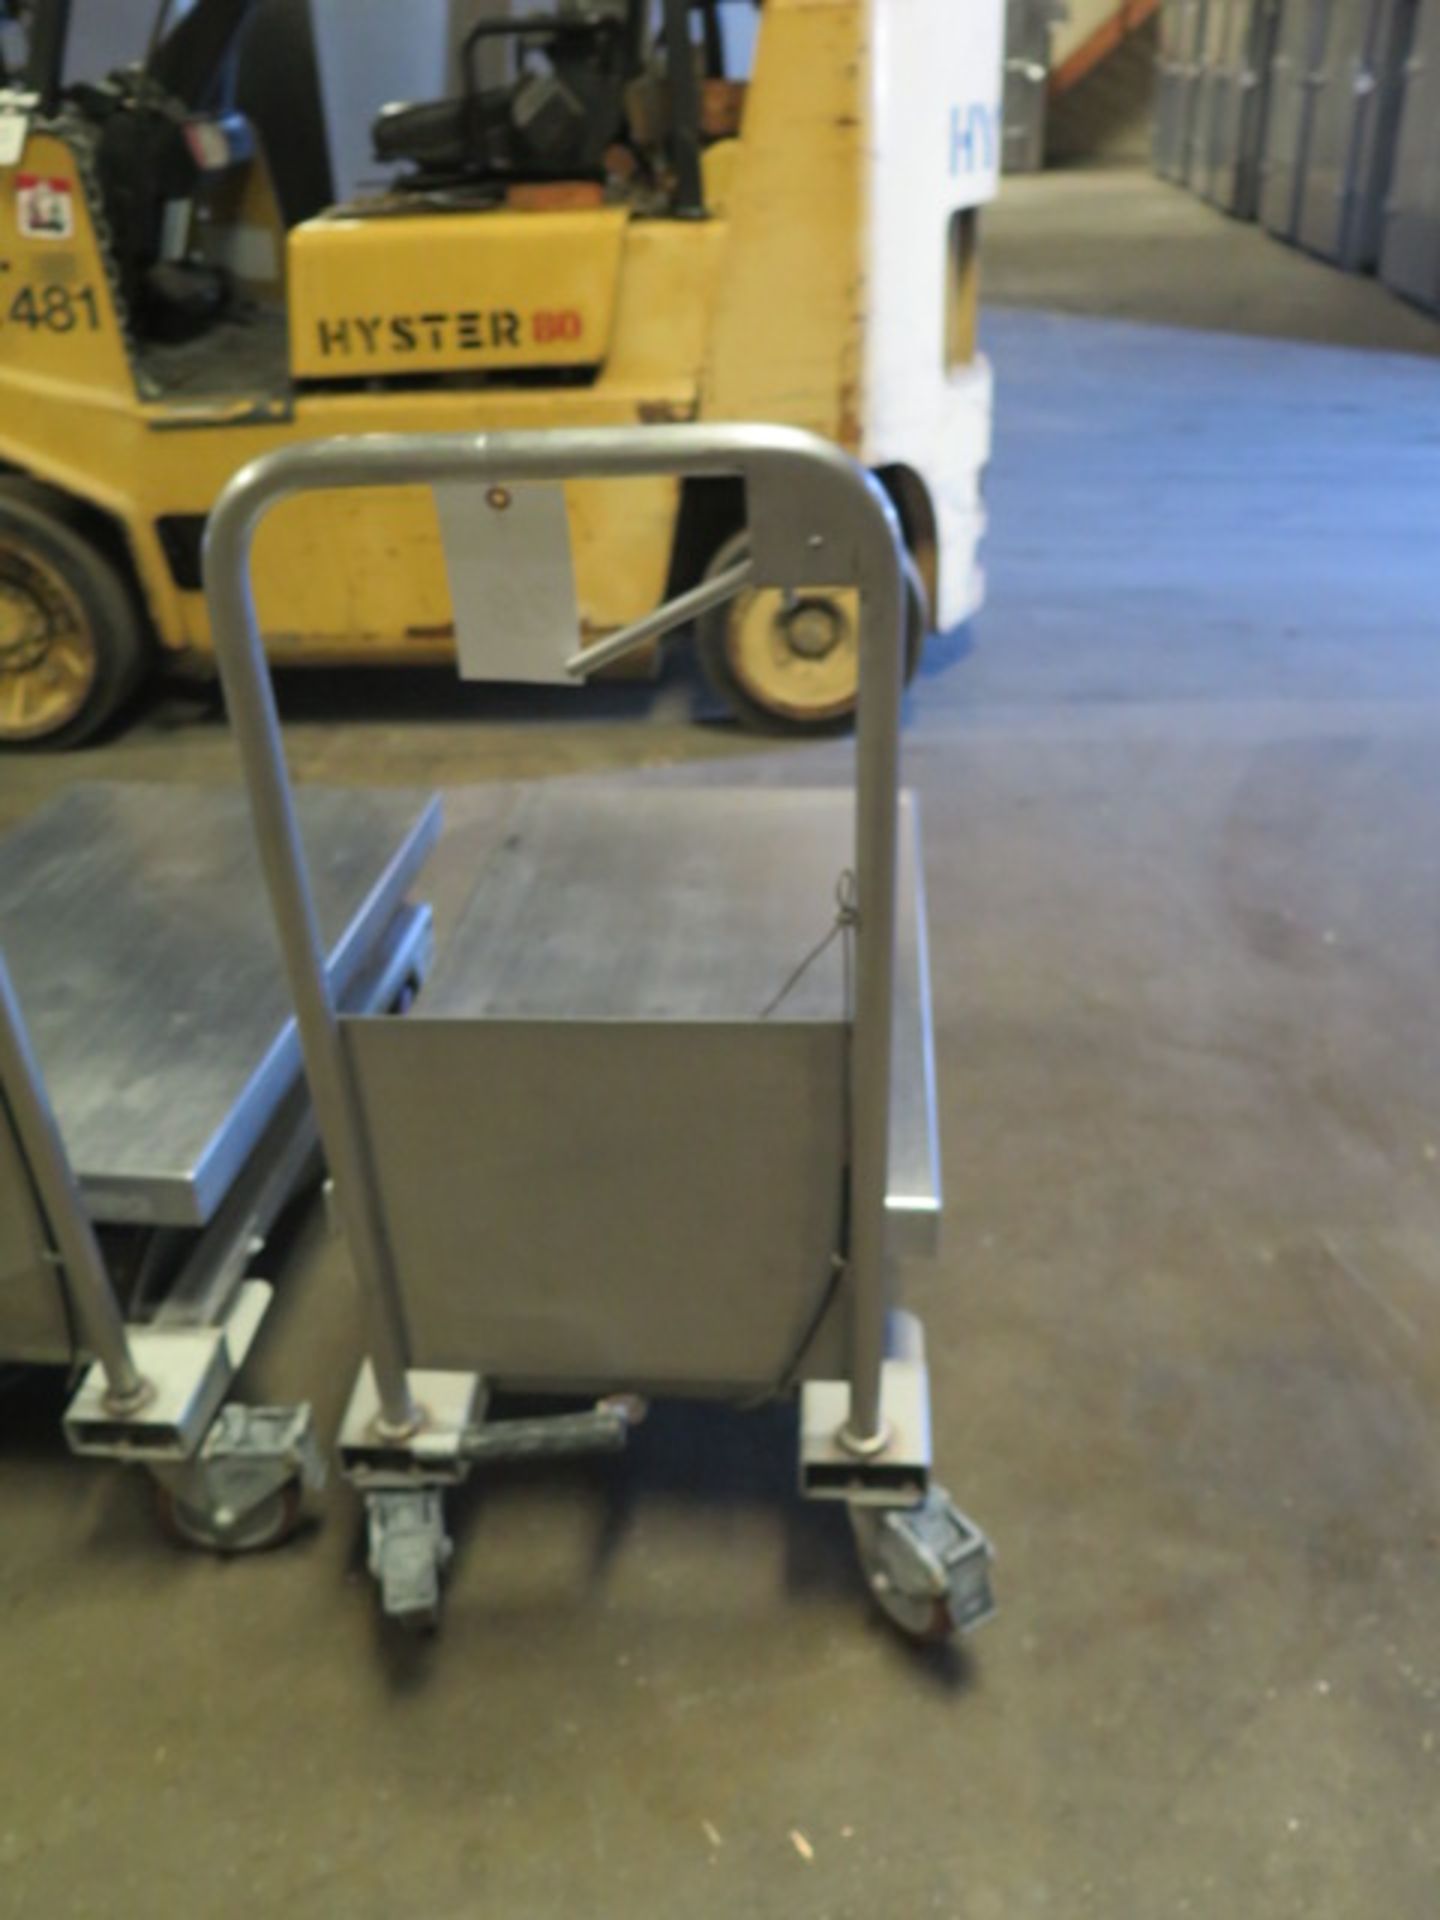 Stainless Steel Hydraulic Lift Cart - Image 3 of 3